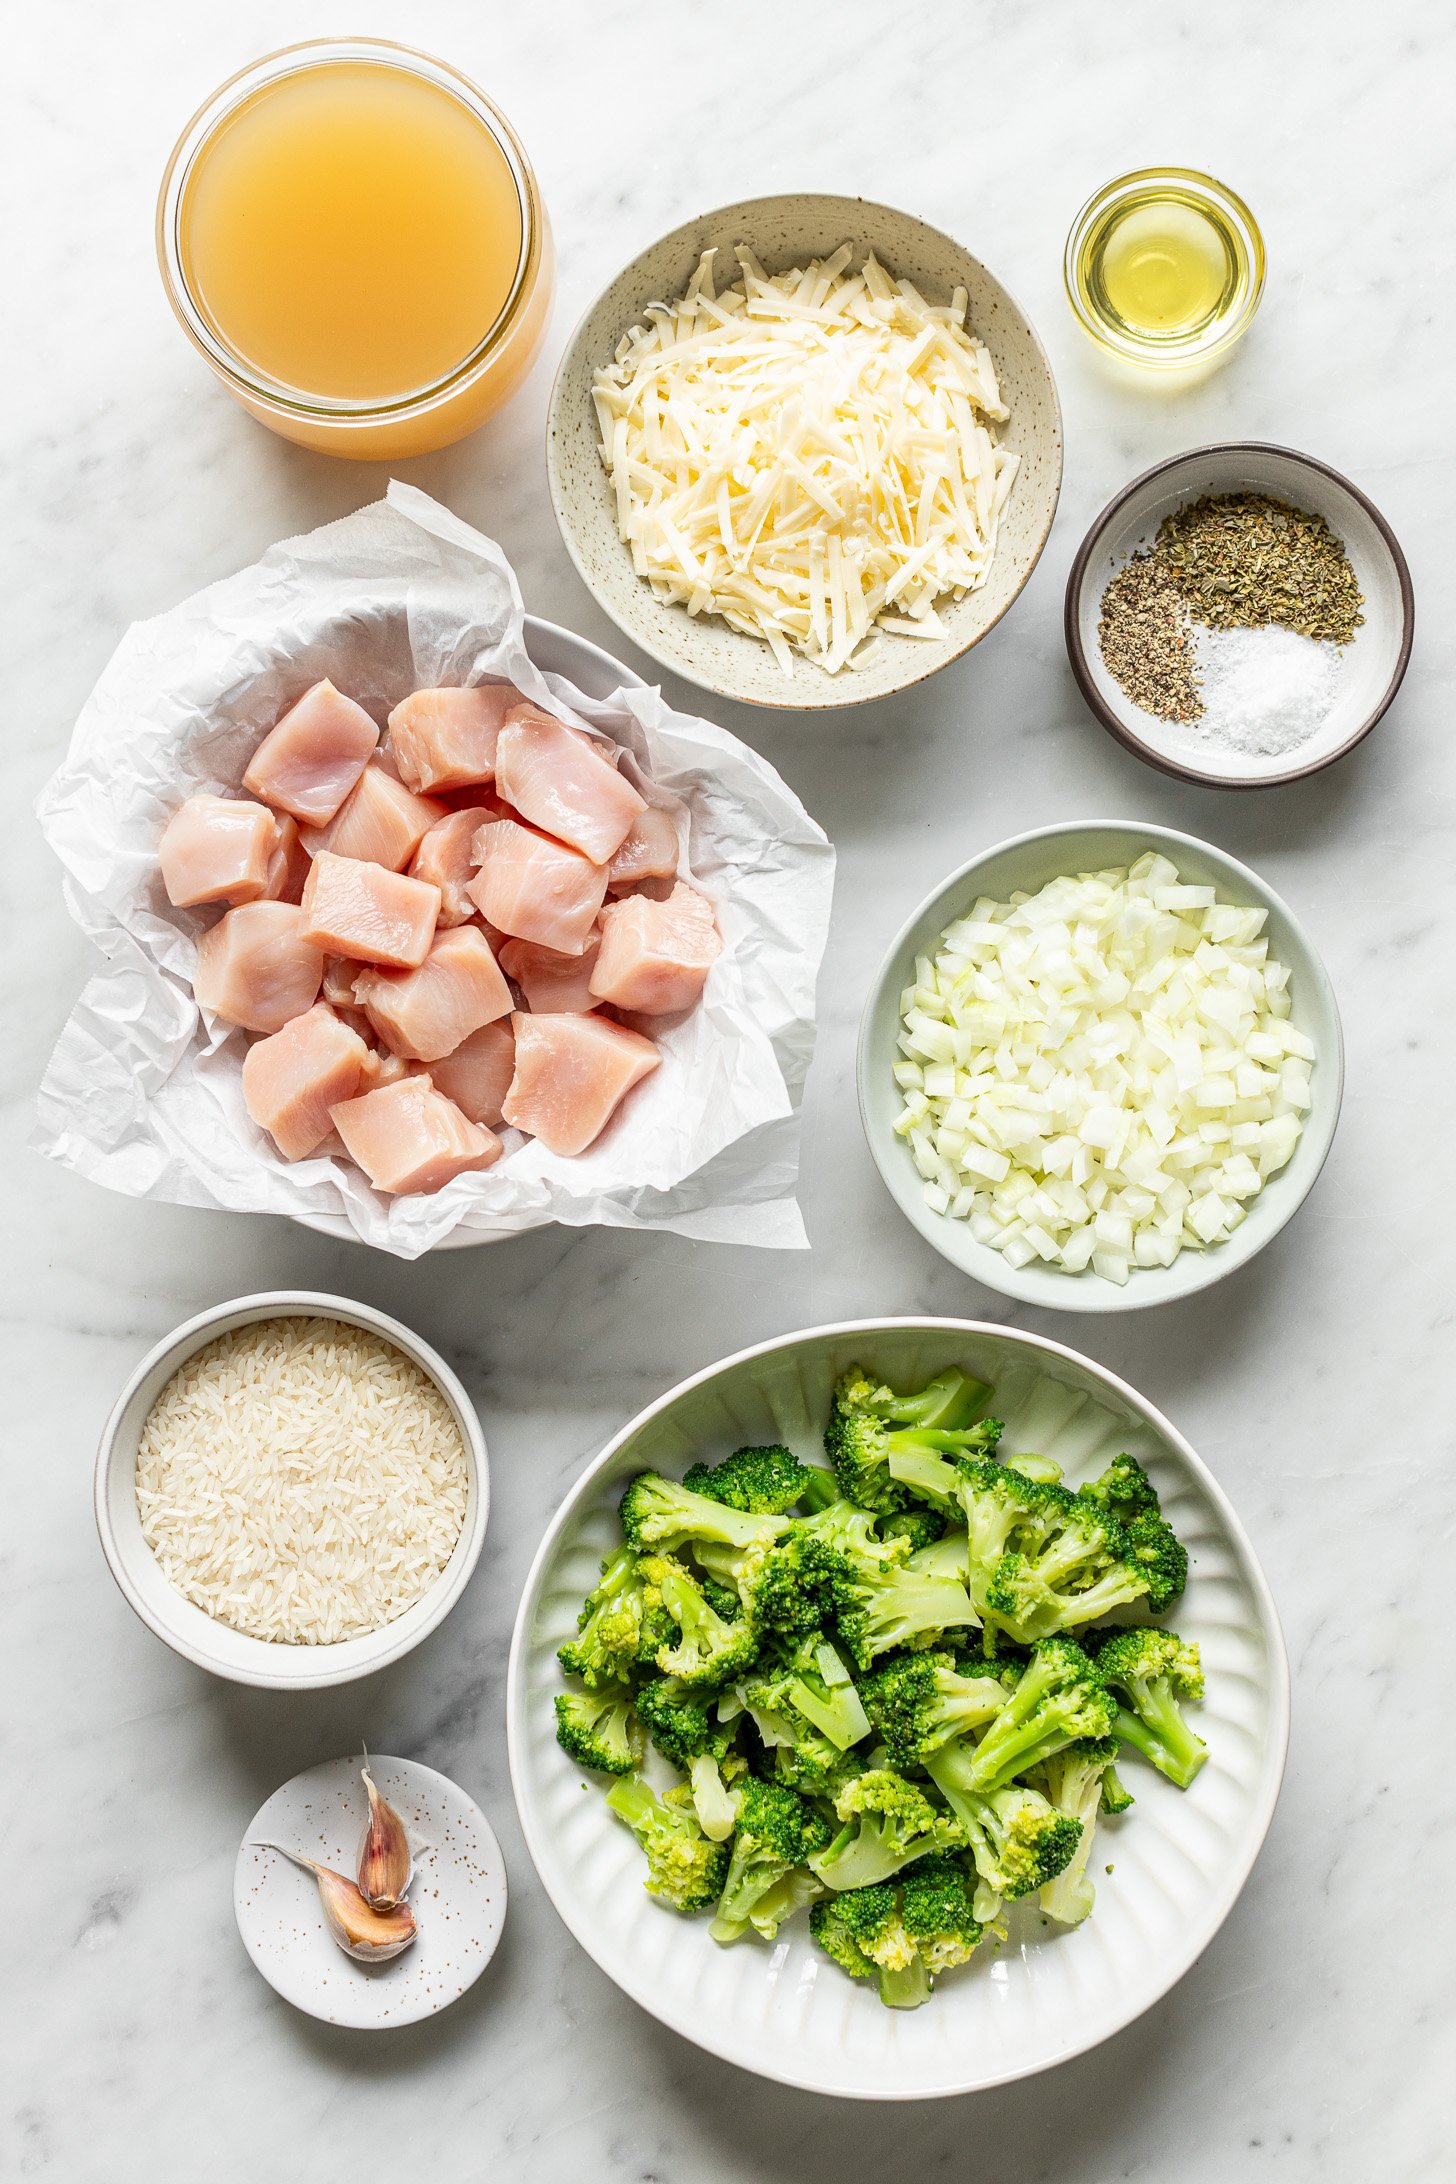 Ingredients for cheesy chicken and rice on the table before being cooked together.